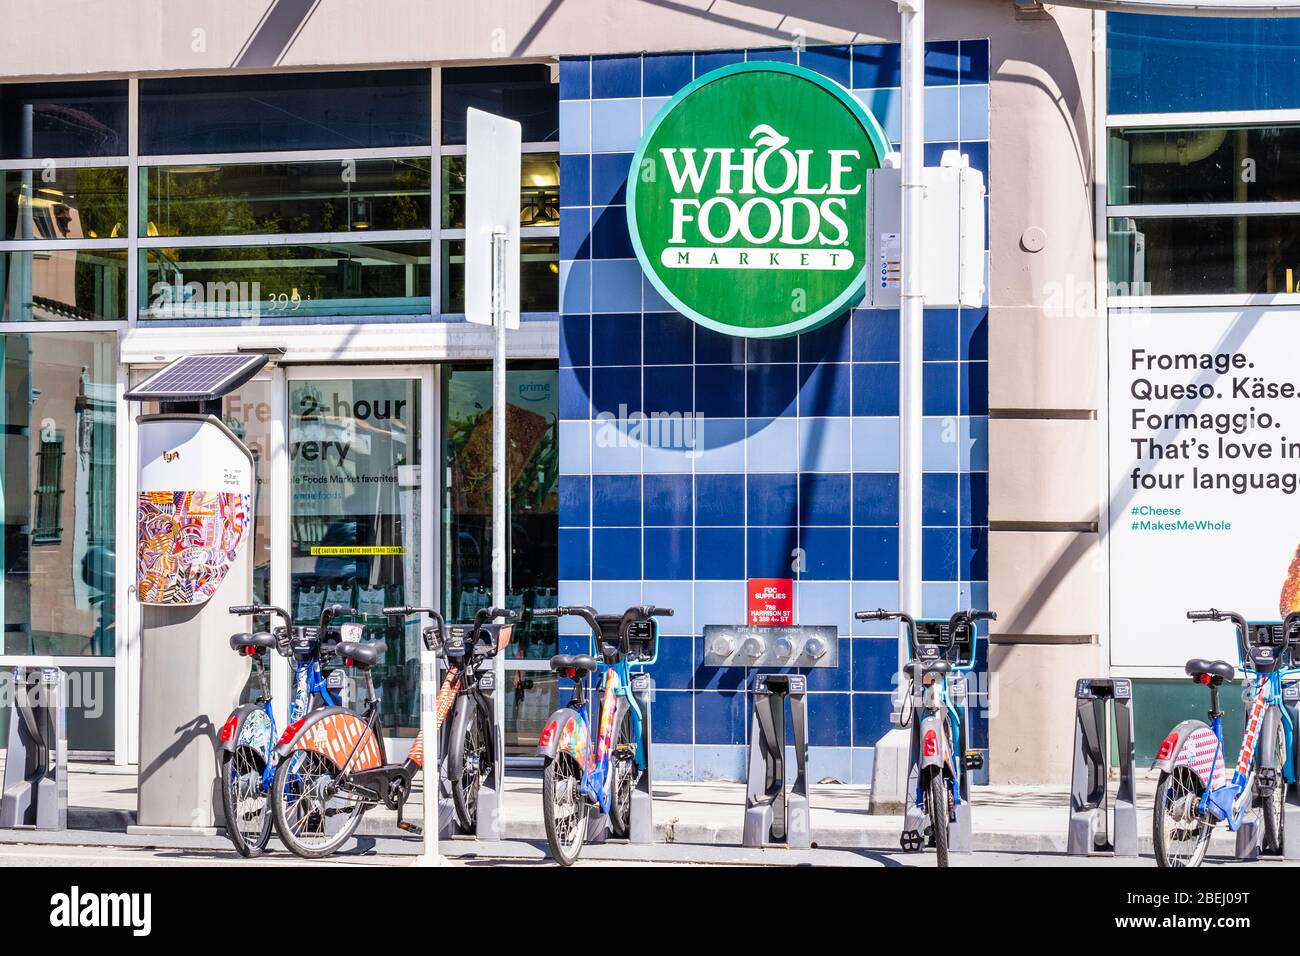 Sep 20, 2019 San Francisco / CA / USA - LYFT Bay Wheels (formerly Ford GoBike) rental station located in front of a Whole Foods Market location Stock Photo